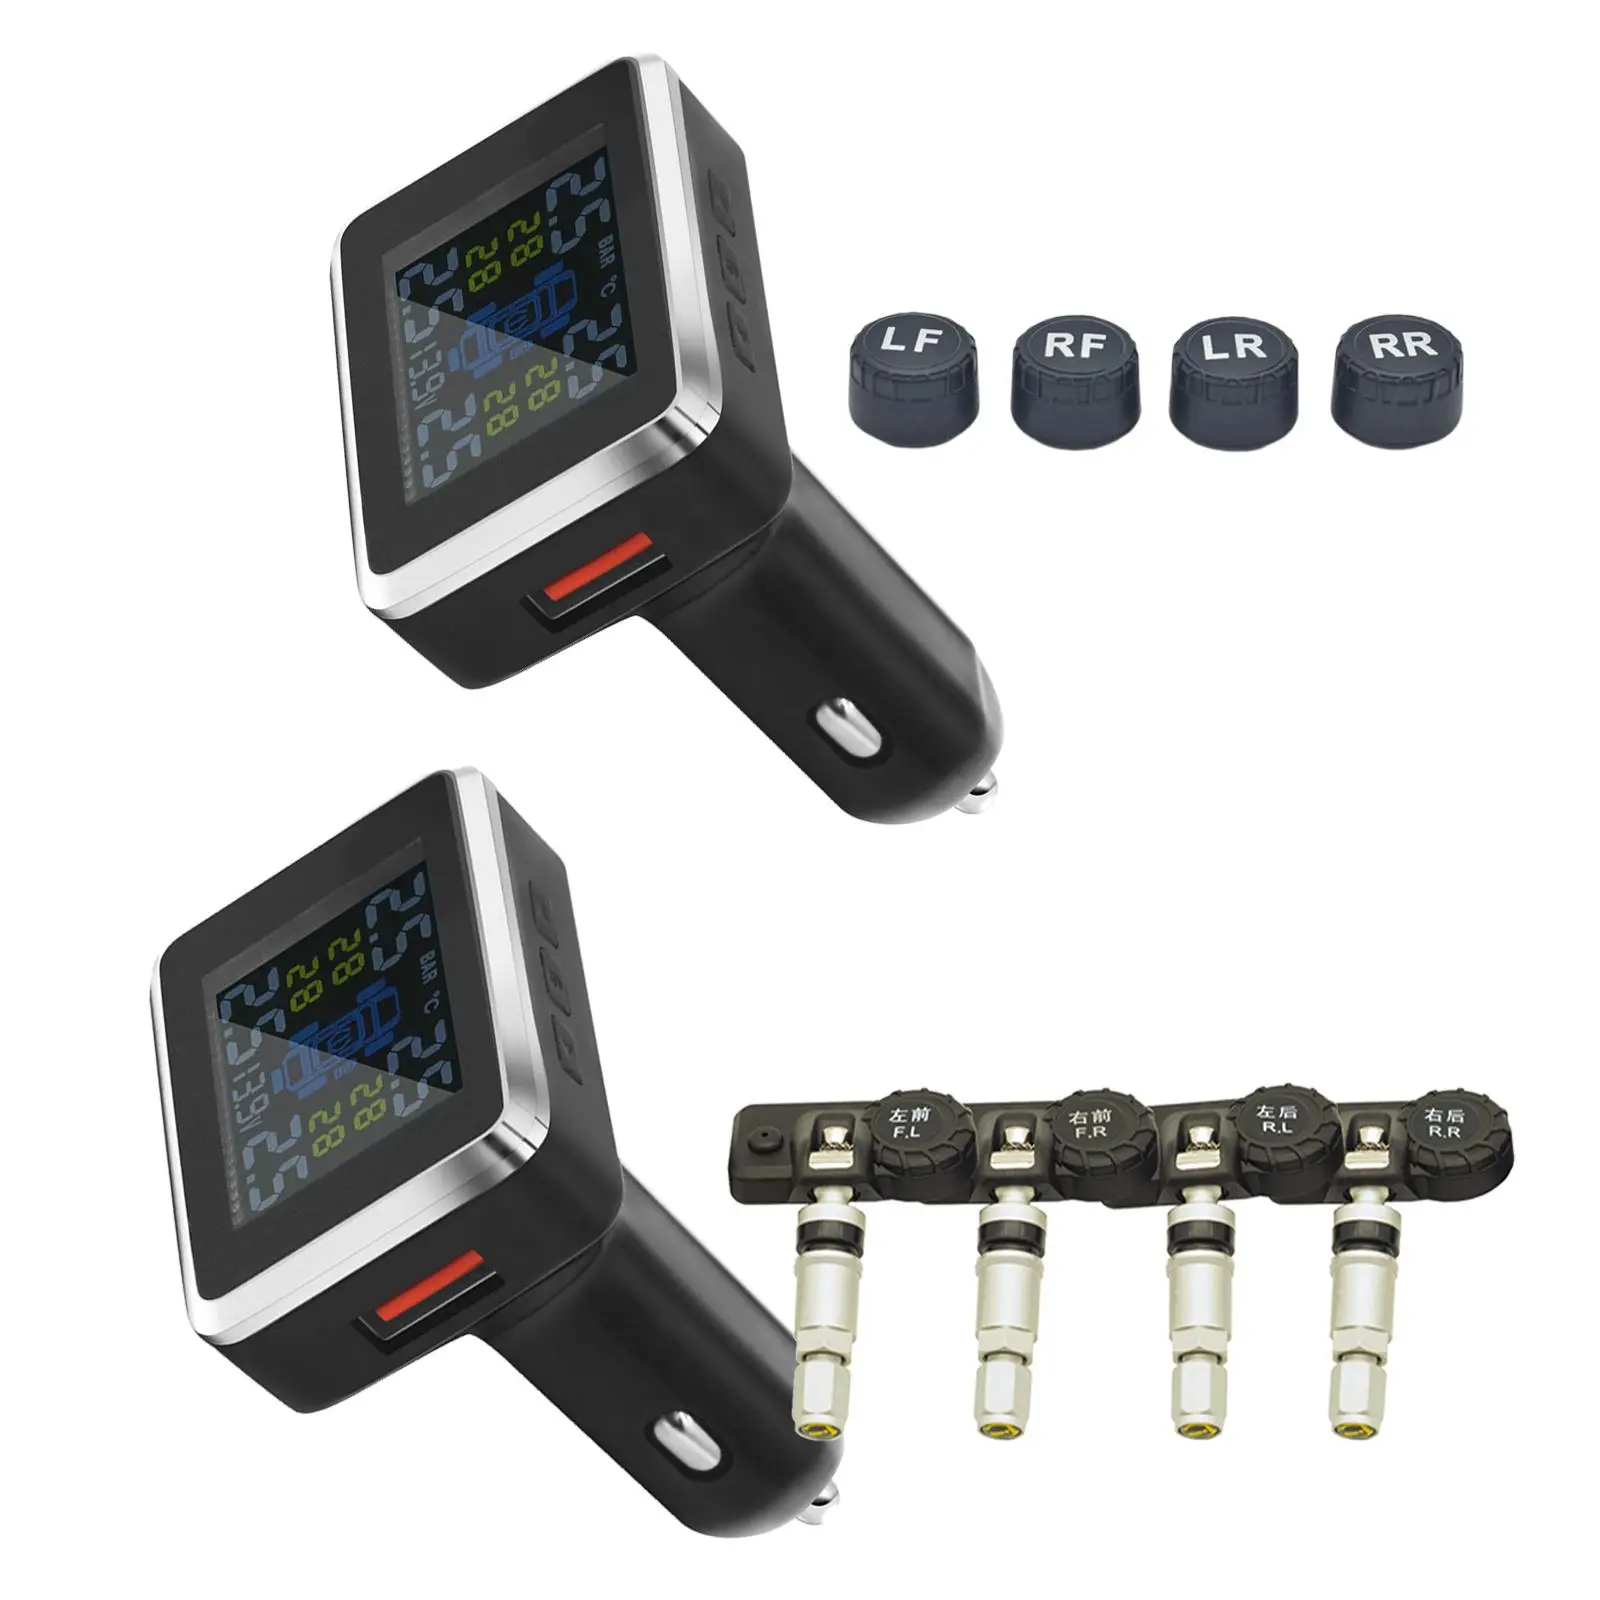 Tire Pressure Monitoring System TPMS Battery Voltage Display W/4Pcs Sensors Fits for SUV